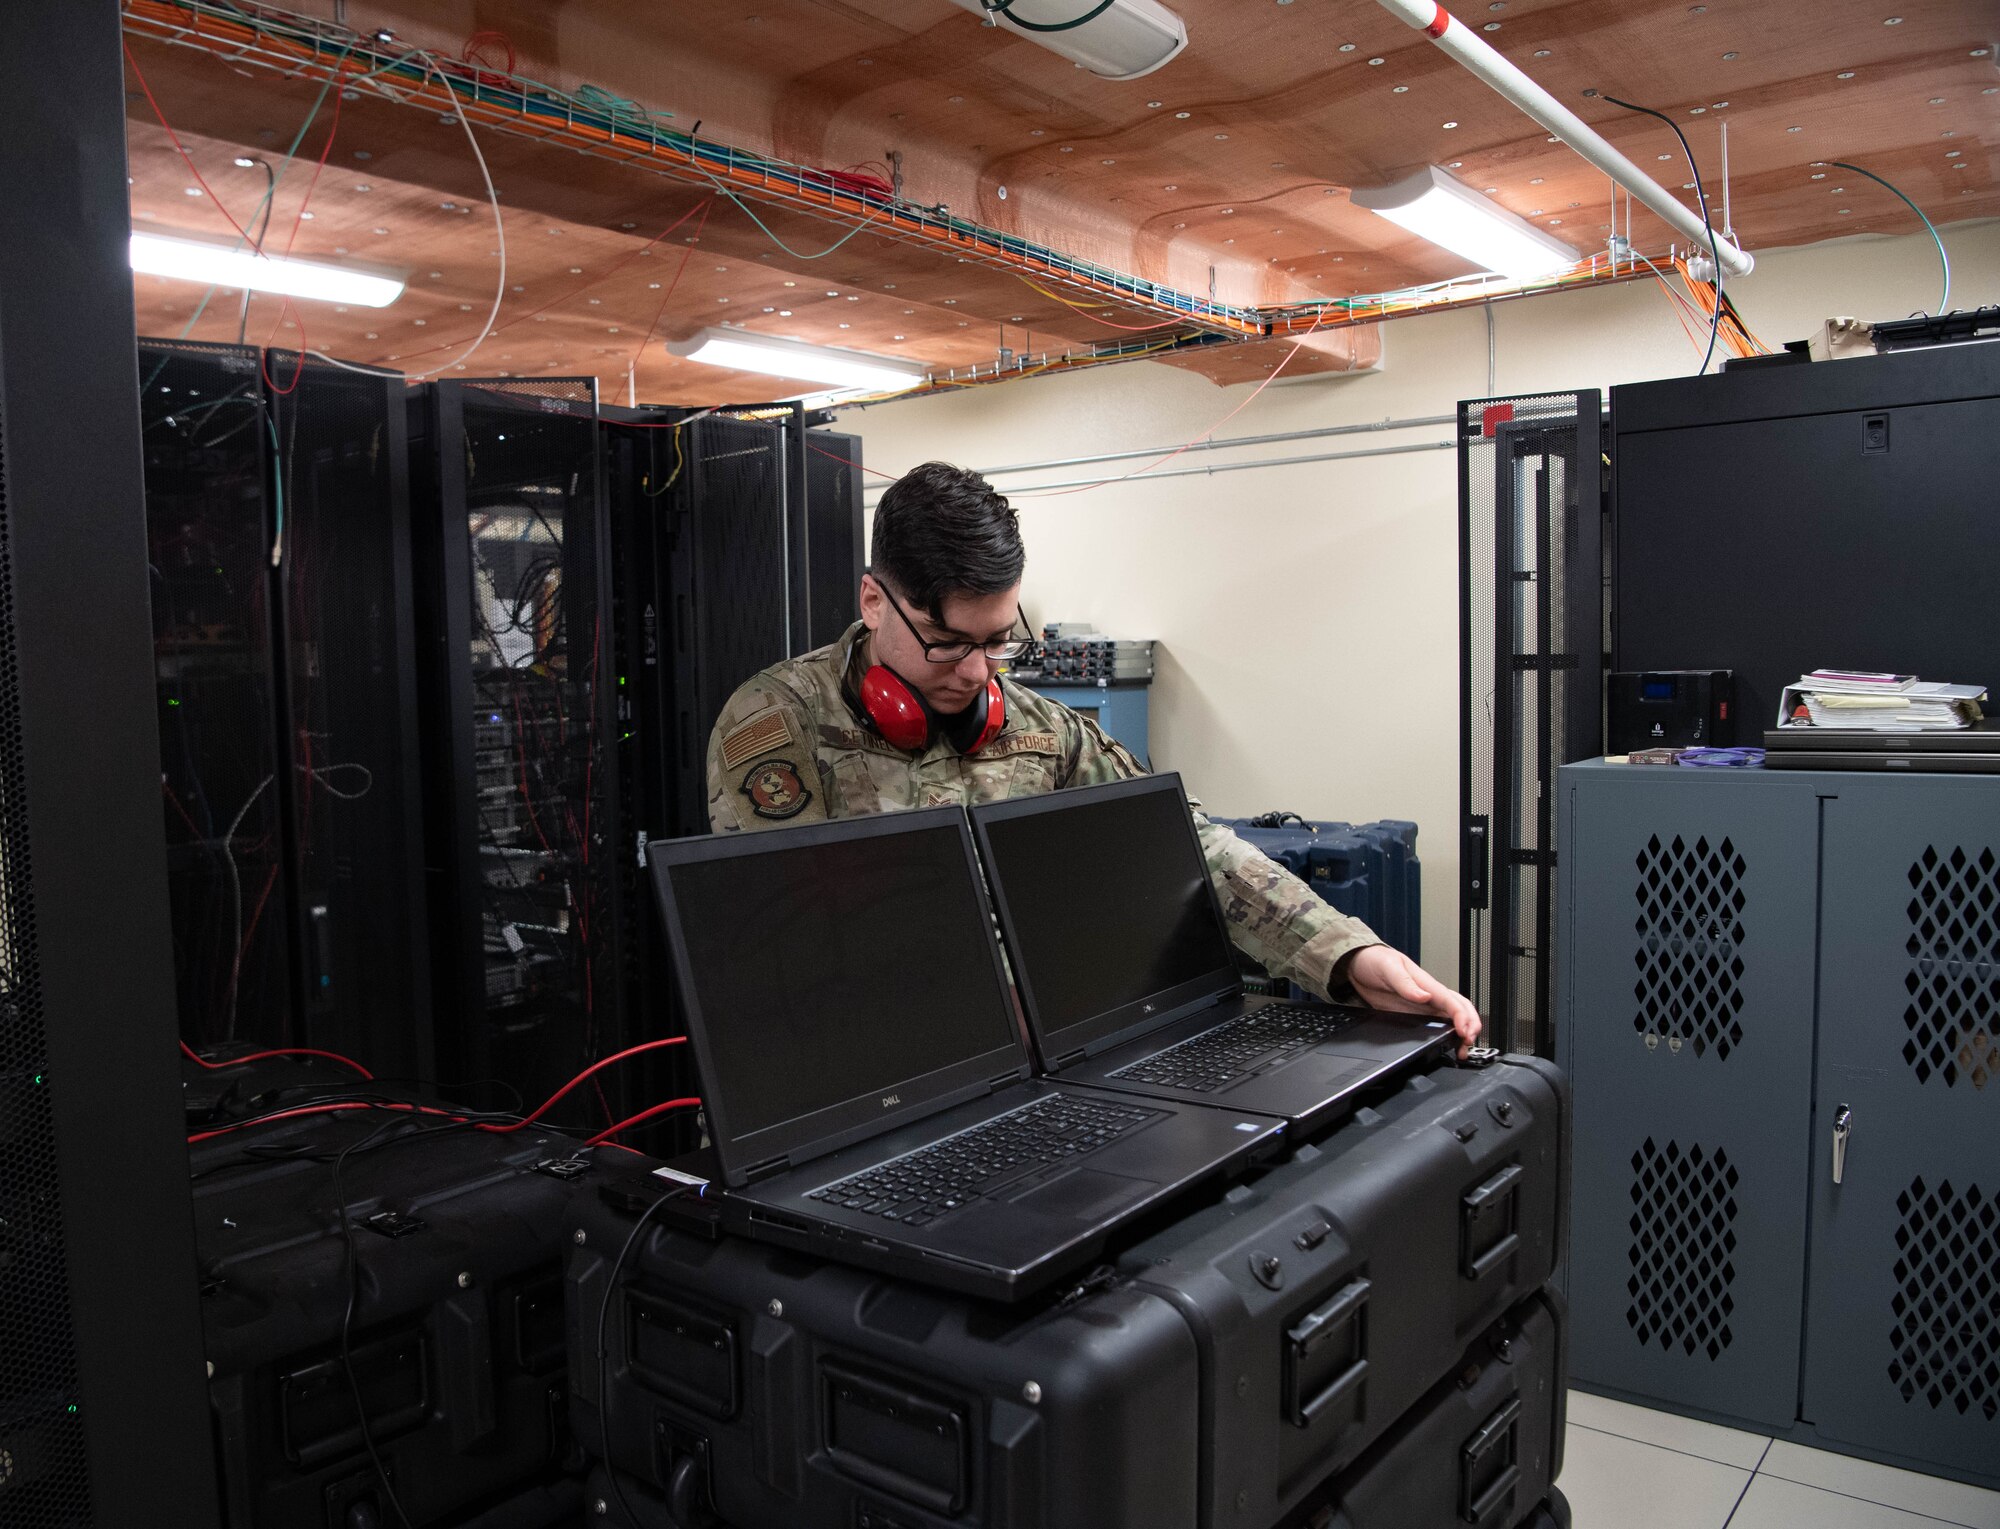 Staff Sgt. Jon Cetinel, 608th Air Communications Squadron cyber defense supervisor, sets up connections for laptops as part of the cyber vulnerability assessment-hunter weapon system kit. This is key to making sure all platforms and cables are connected before powering on the system. (U.S. Air Force photo by Staff Sgt. Bria Hughes)